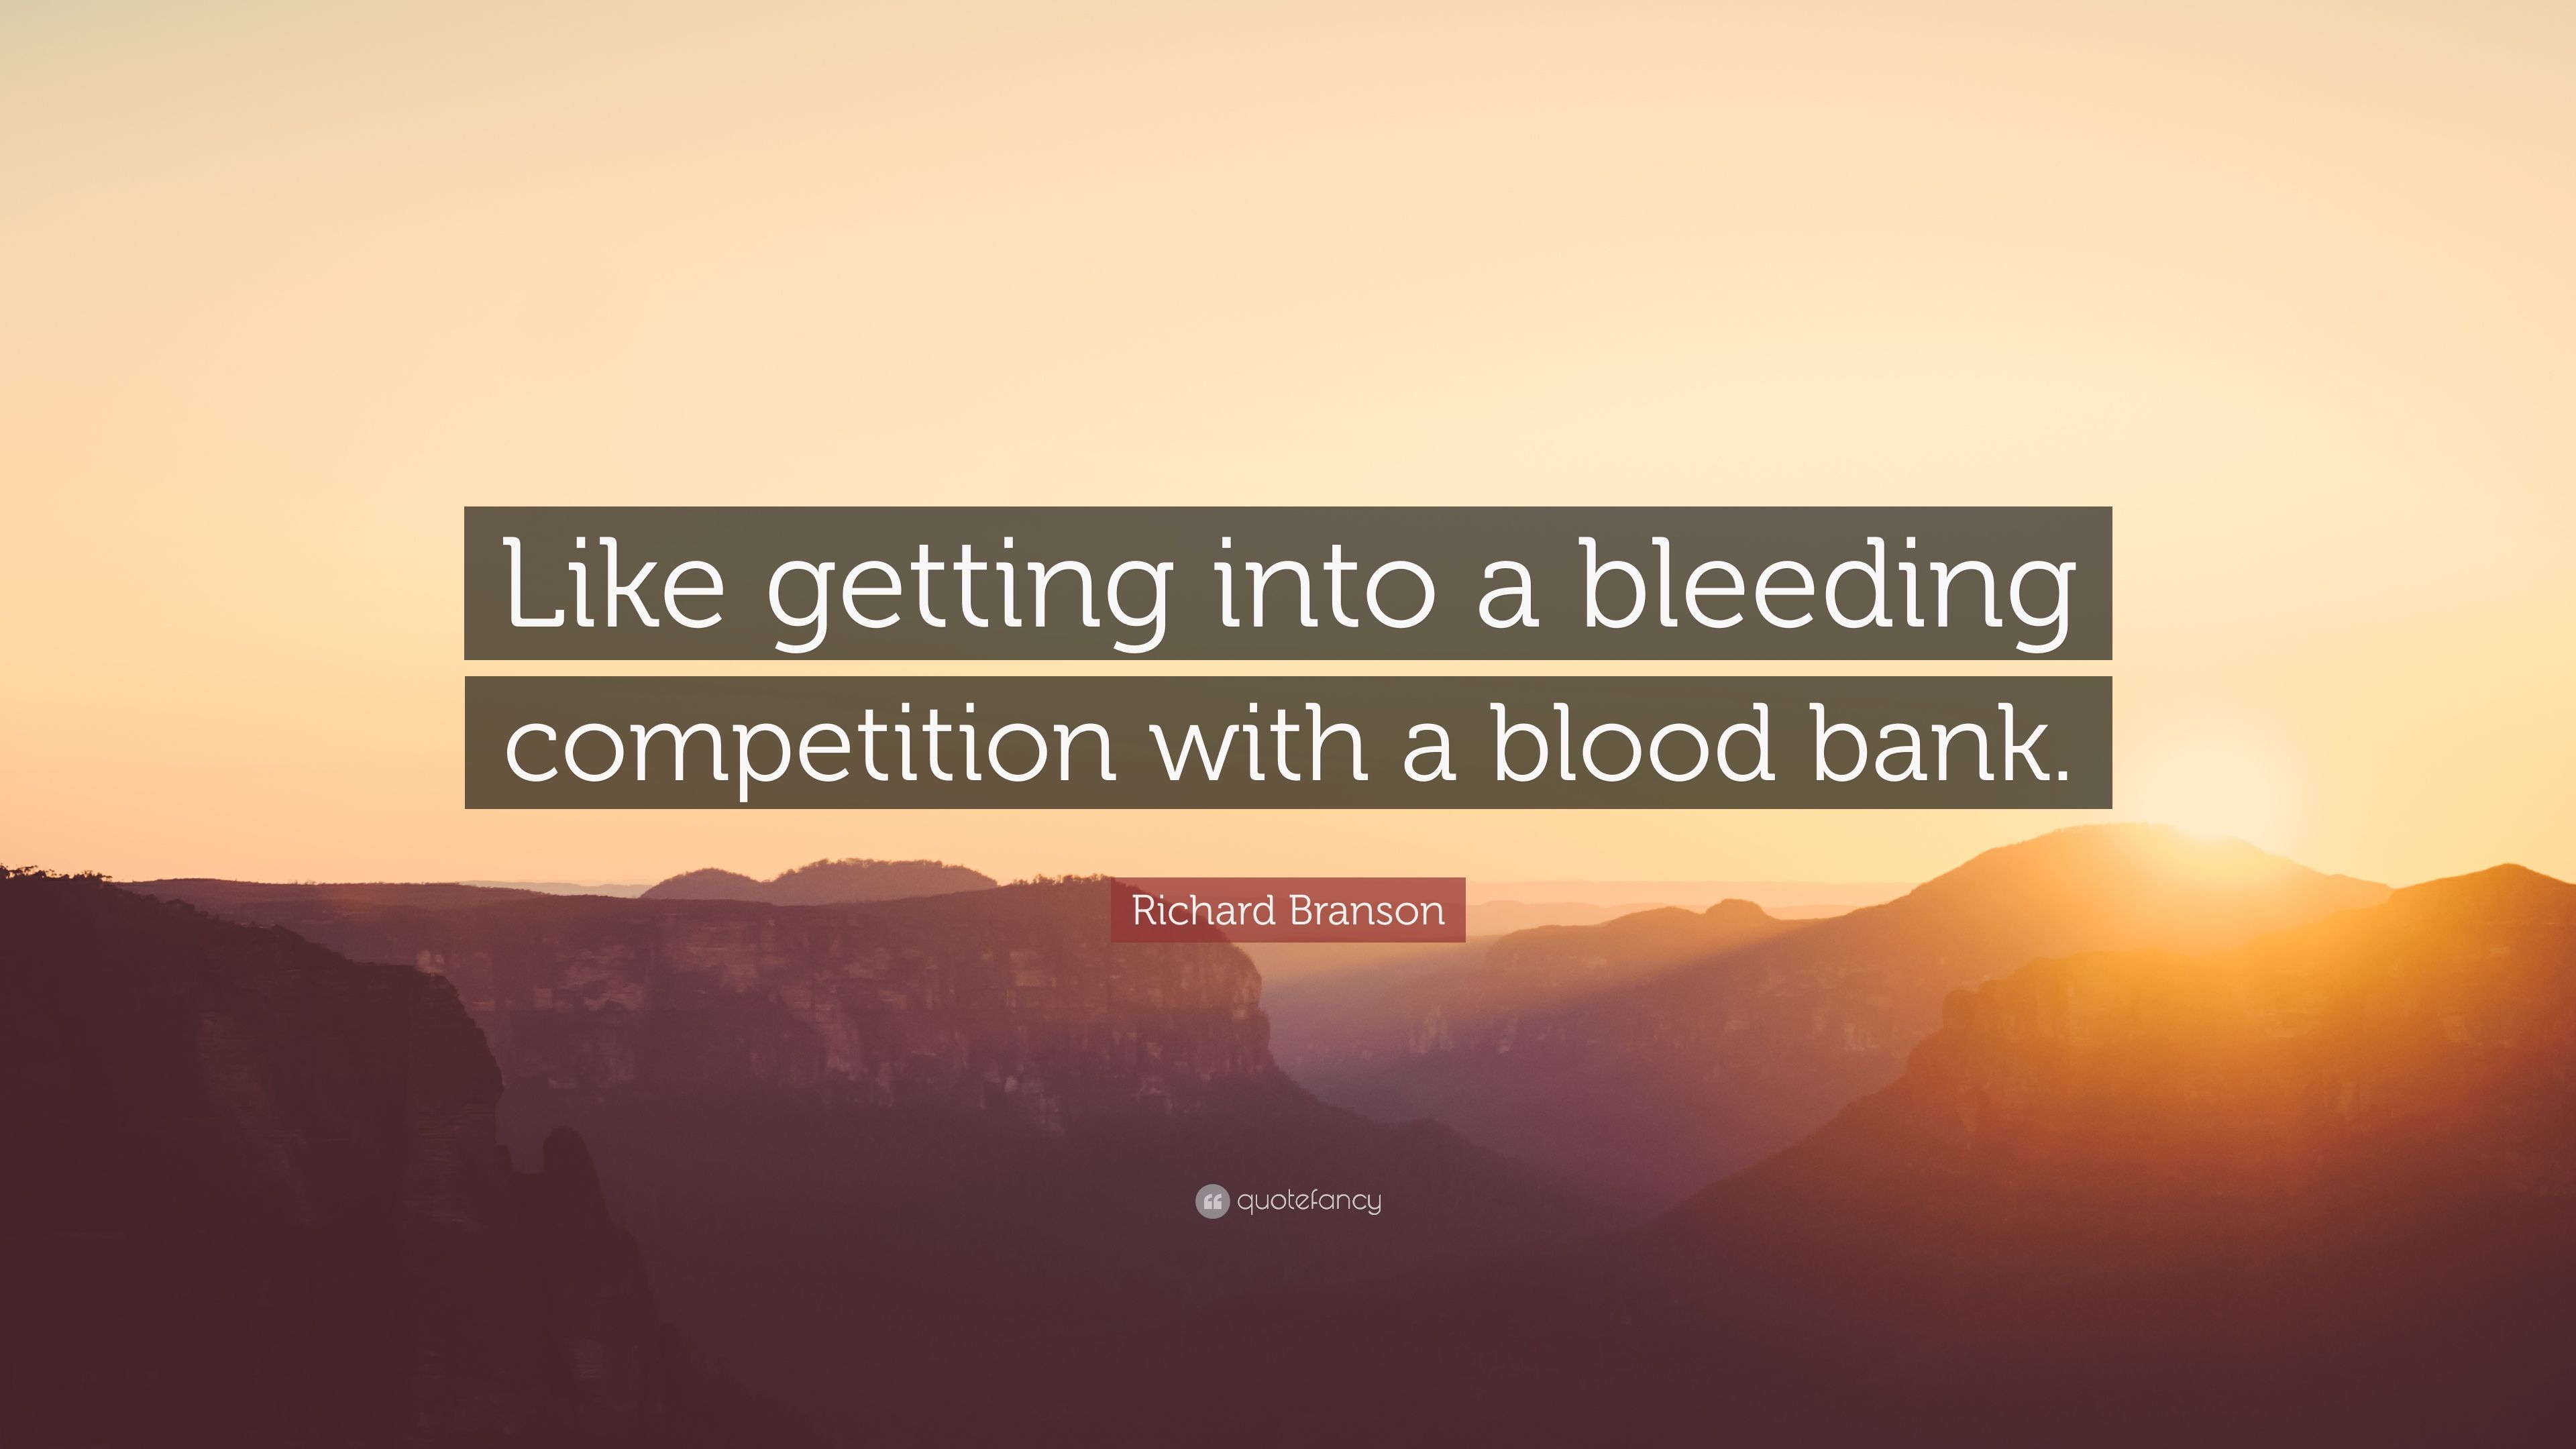 Richard Branson Quote: “Like getting into a bleeding competition with a blood bank.” (7 wallpaper)